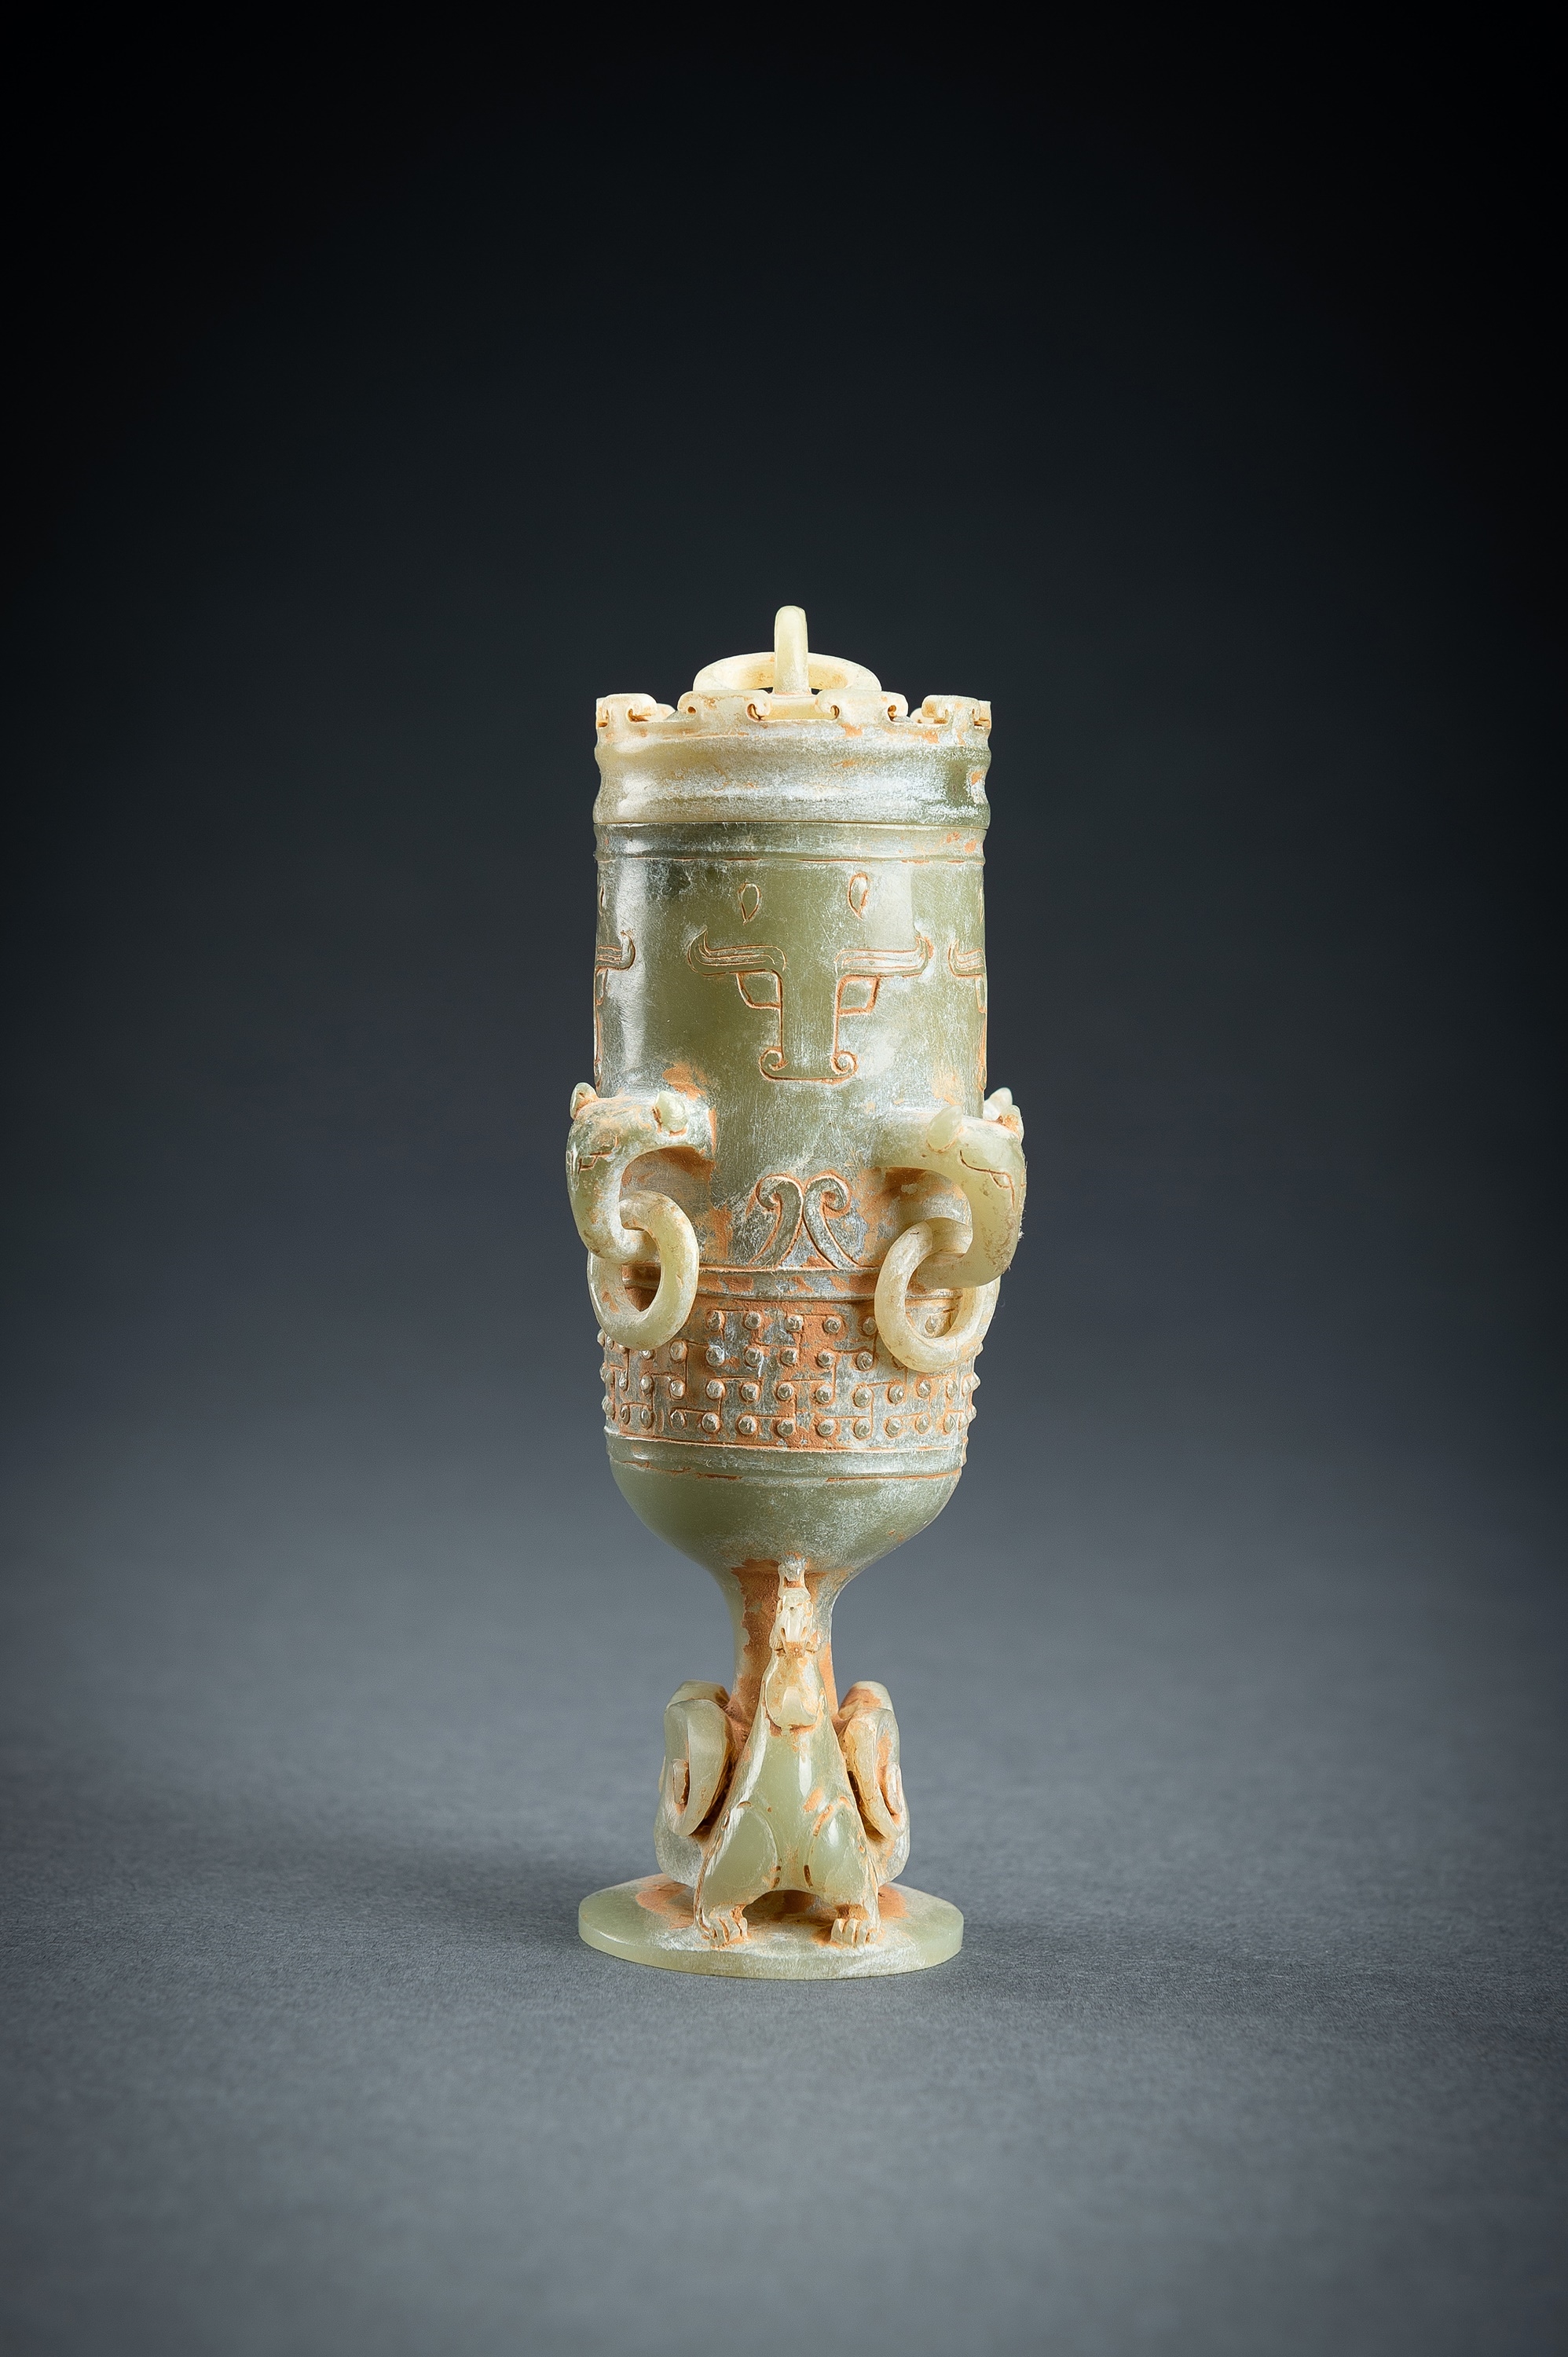 Artwork by Han Dynasty, A SMALL ARCHAISTIC CELADON JADE VASE AND COVER, Made of translucent stone